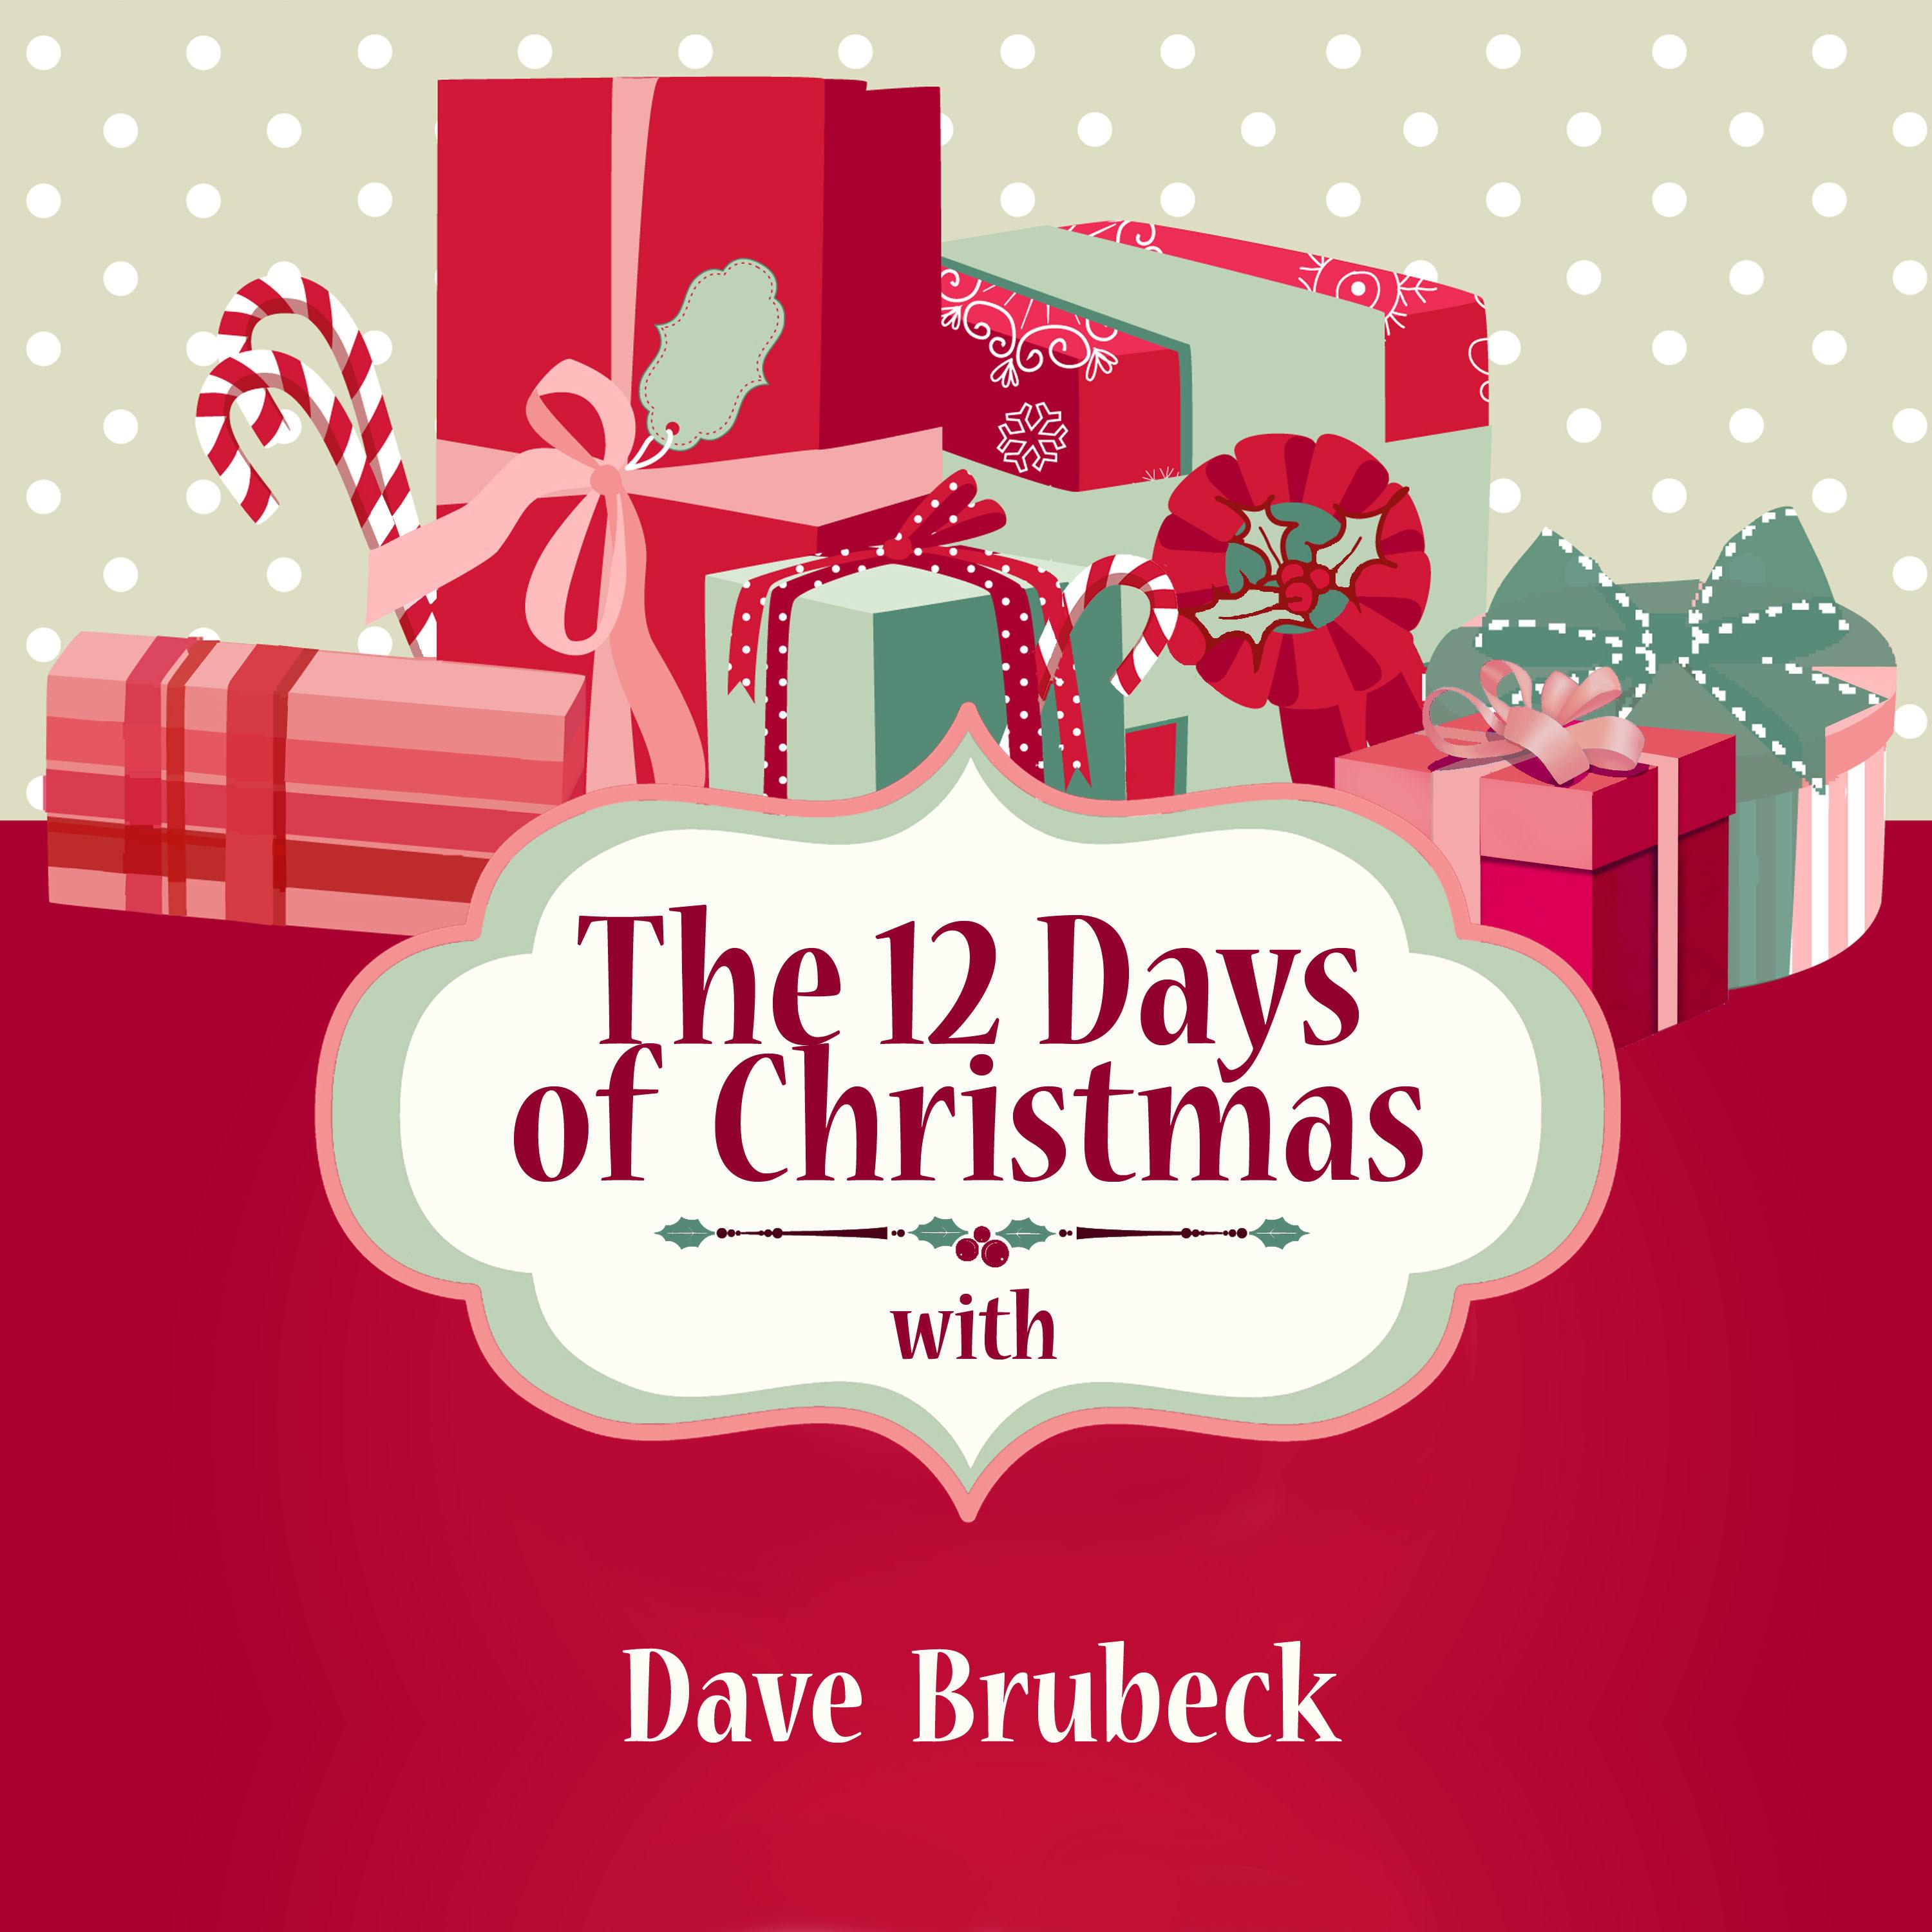 The 12 Days of Christmas with Dave Brubeck